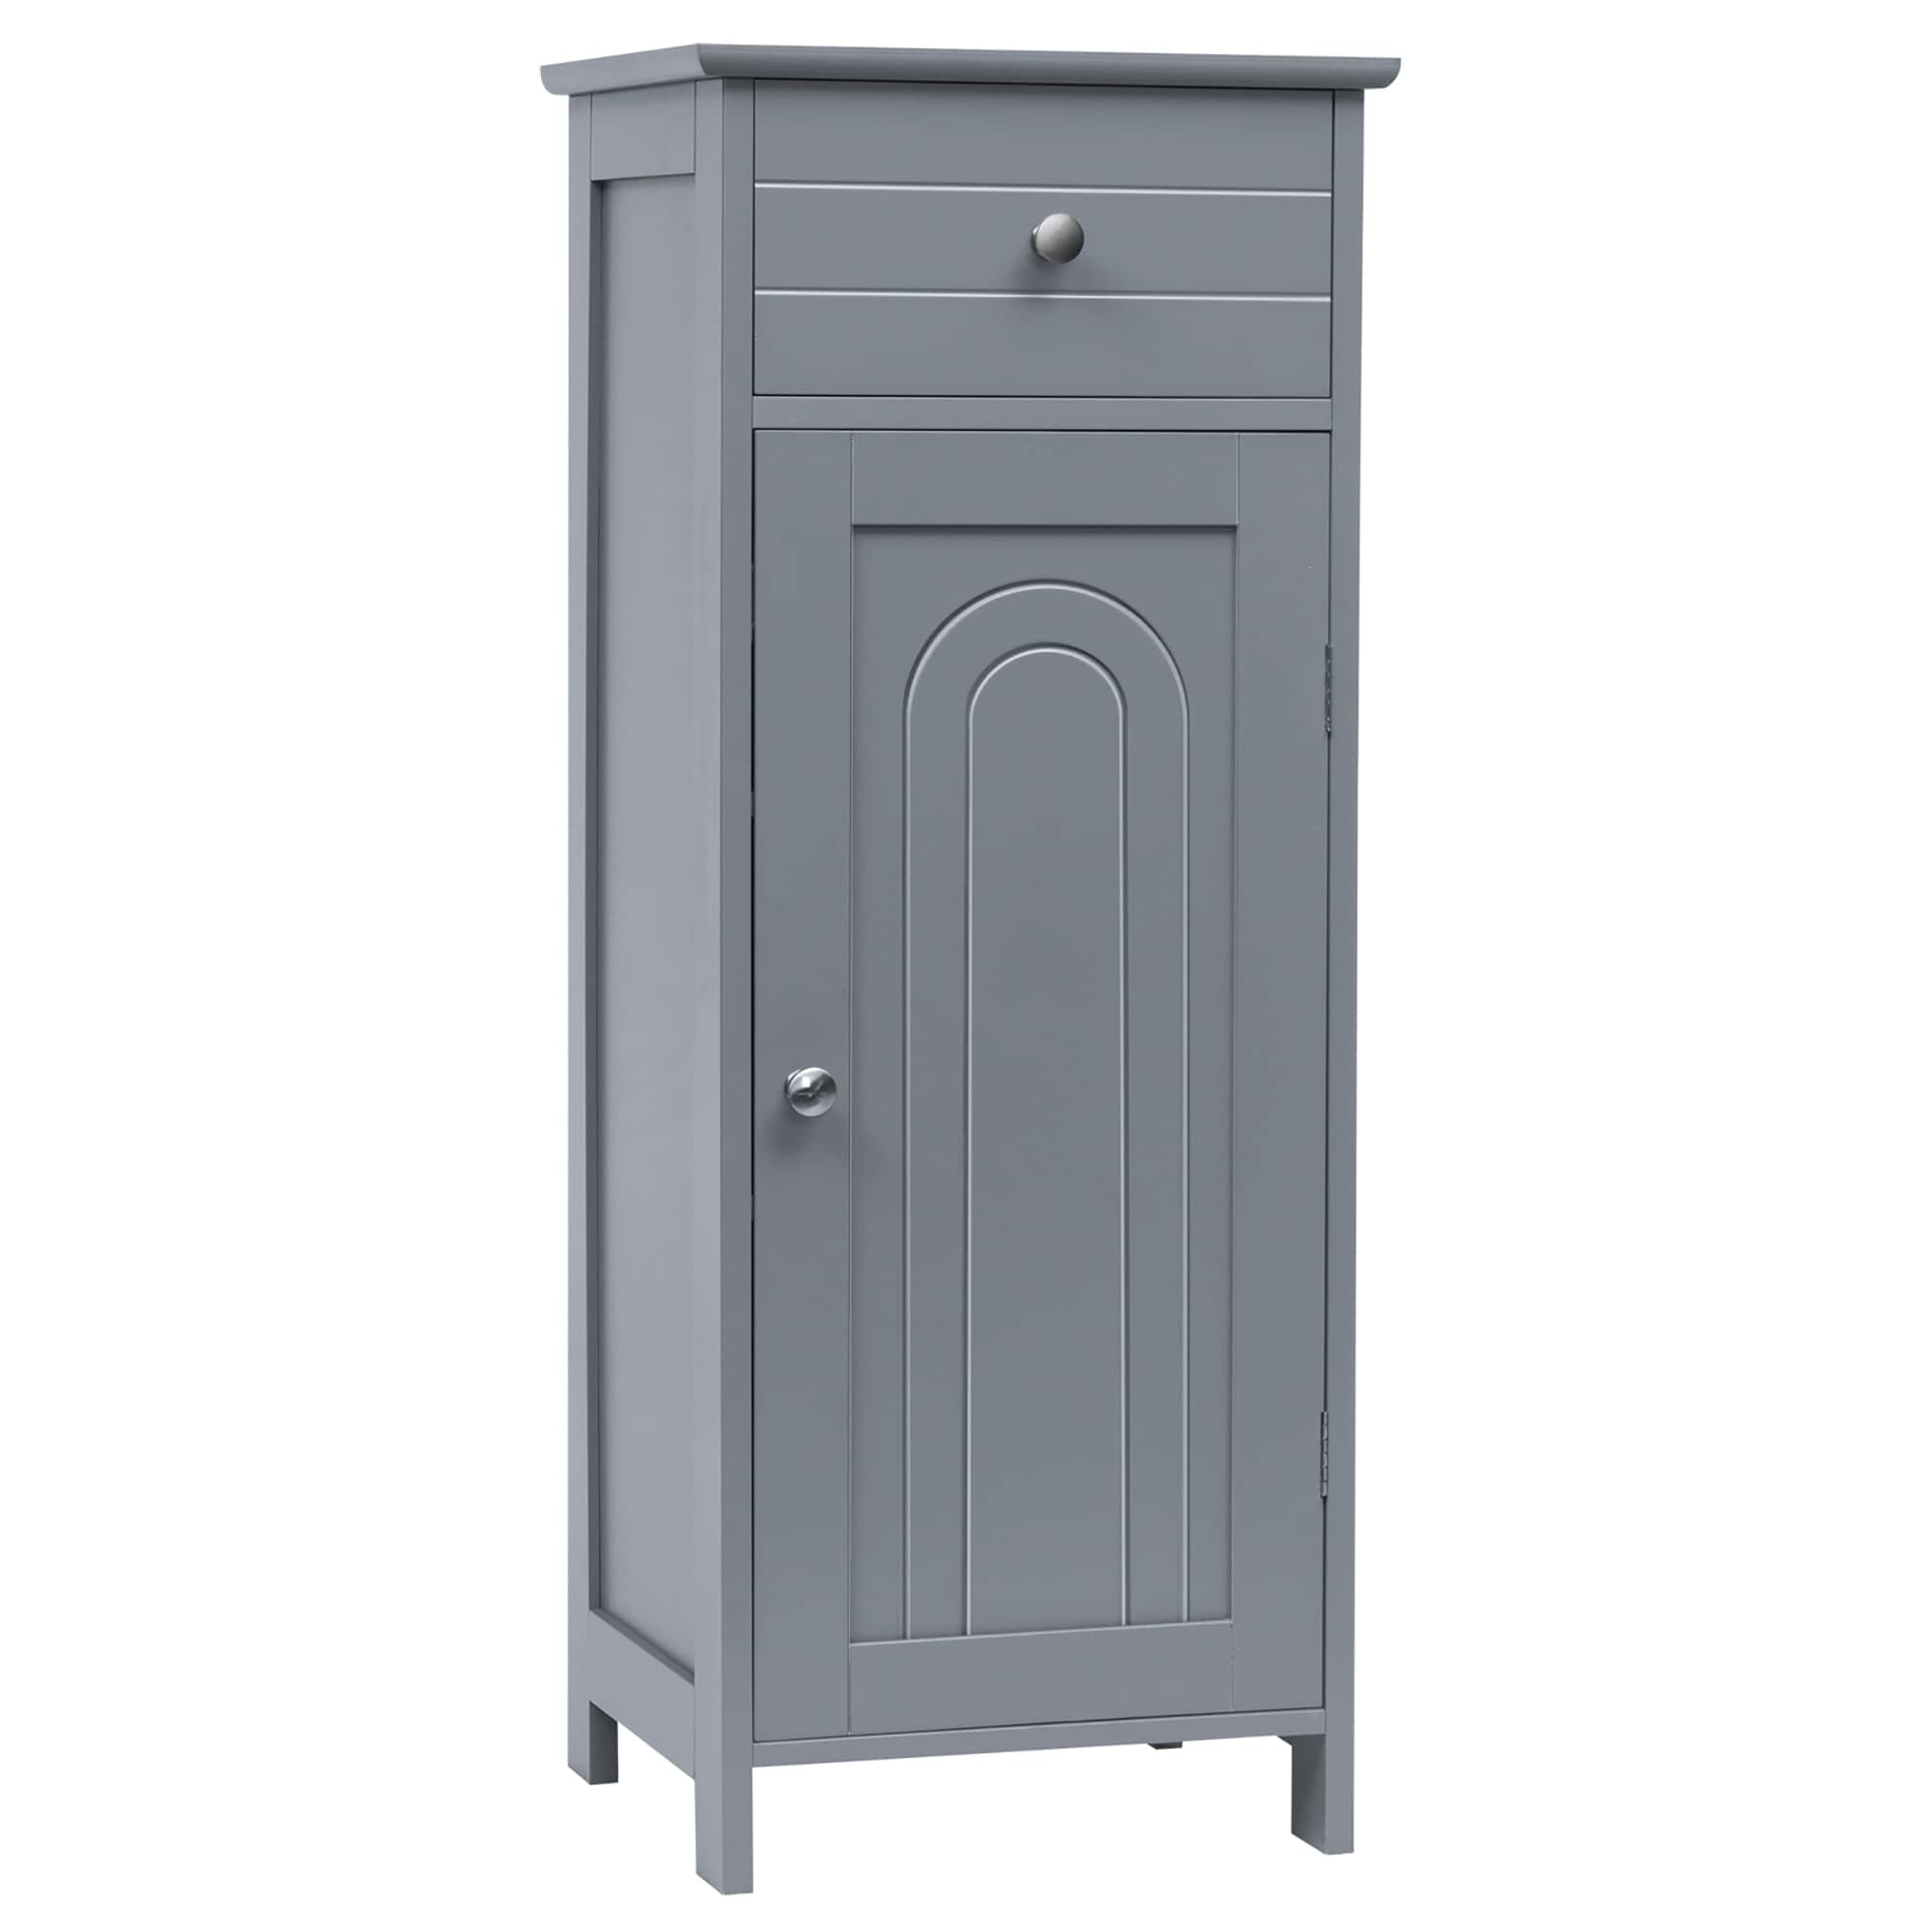 https://ak1.ostkcdn.com/images/products/is/images/direct/0eb53f79a59cbc4a2f73fc88e156ae475c1f4d44/Costway-Bathroom-Floor-Cabinet-Storage-Organizer-Free-Standing-w-.jpg